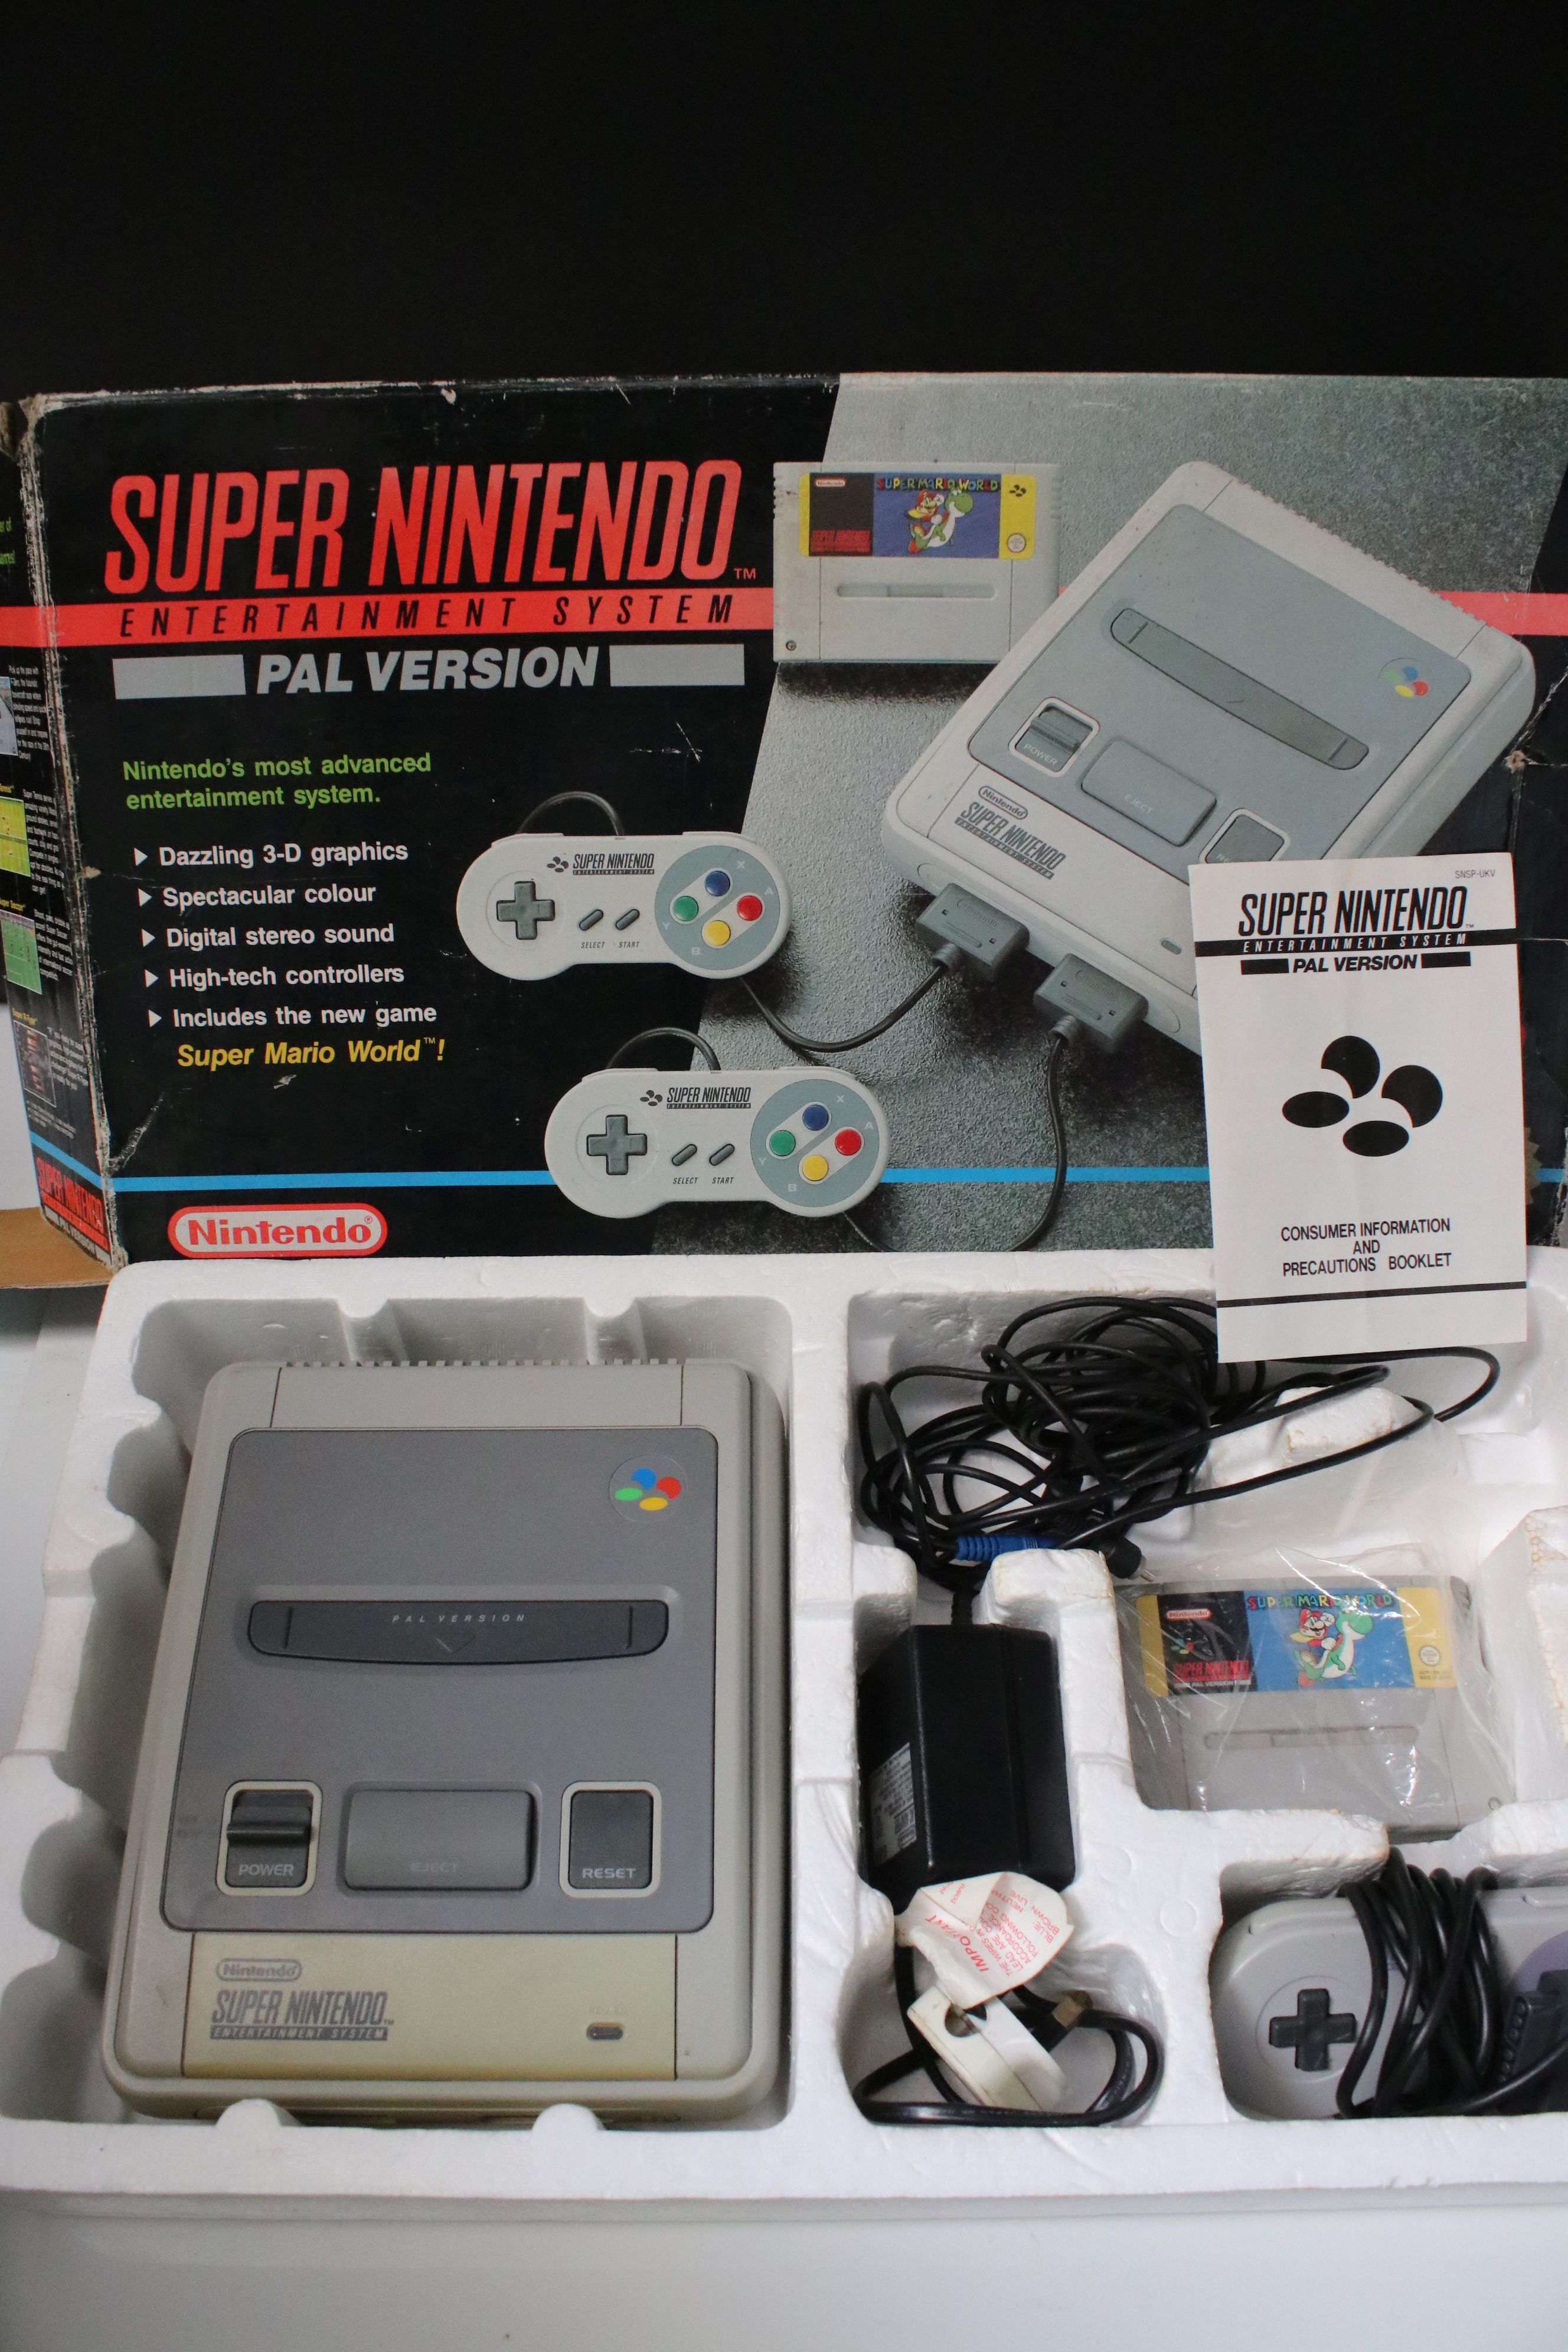 Retro Gaming - Boxed Super Nintendo SNES console with one controller and Super Mario World cartridge - Image 6 of 10